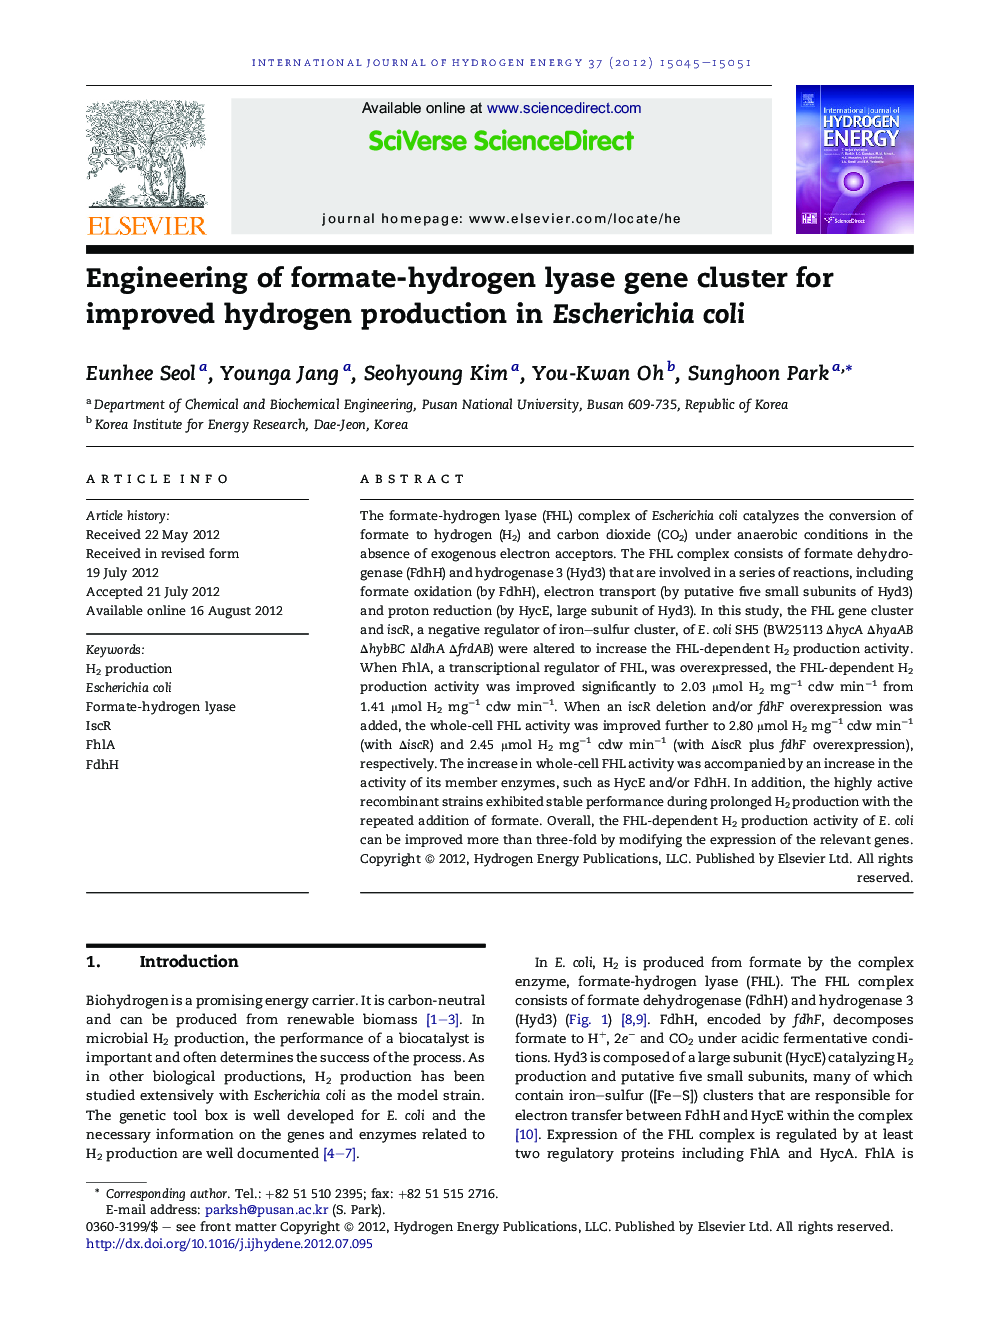 Engineering of formate-hydrogen lyase gene cluster for improved hydrogen production in Escherichia coli